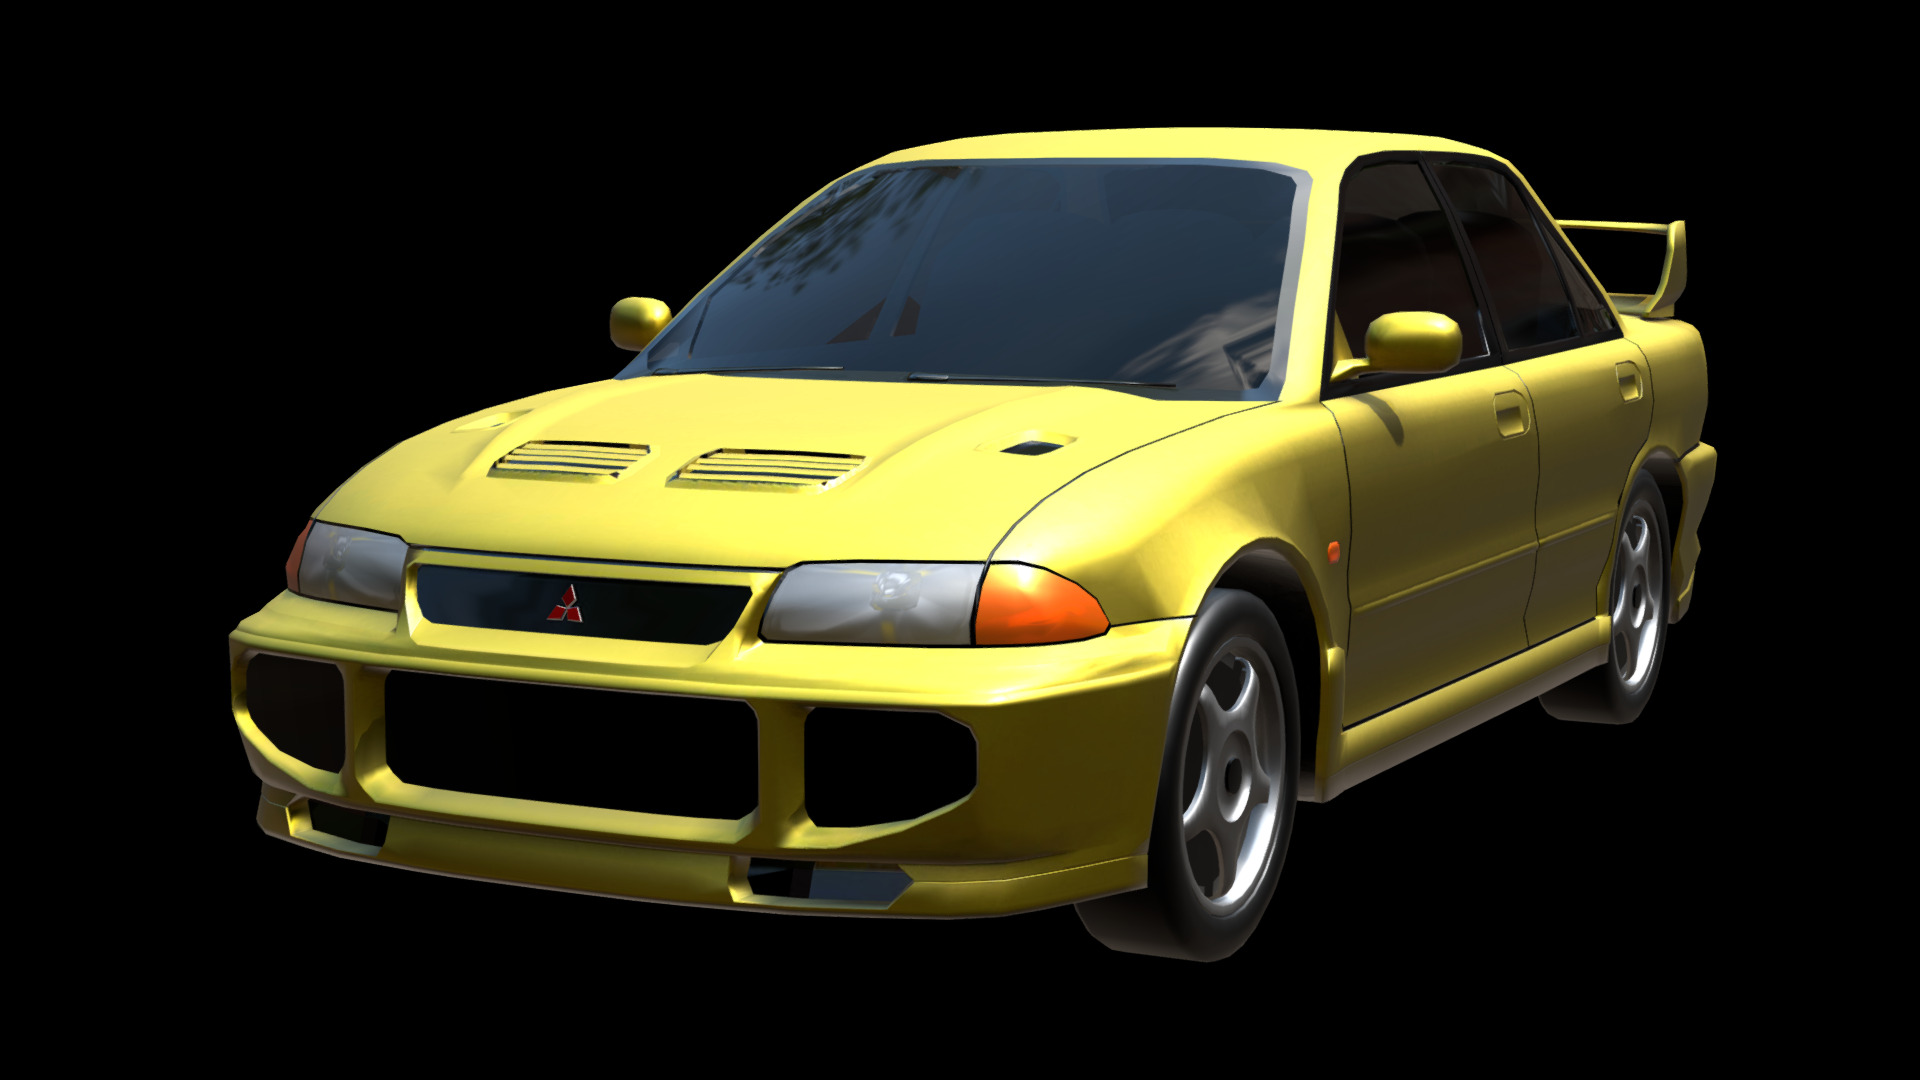 3D model Mitsubishi Lancer Evo 3 - This is a 3D model of the Mitsubishi Lancer Evo 3. The 3D model is about a yellow car with a black background.